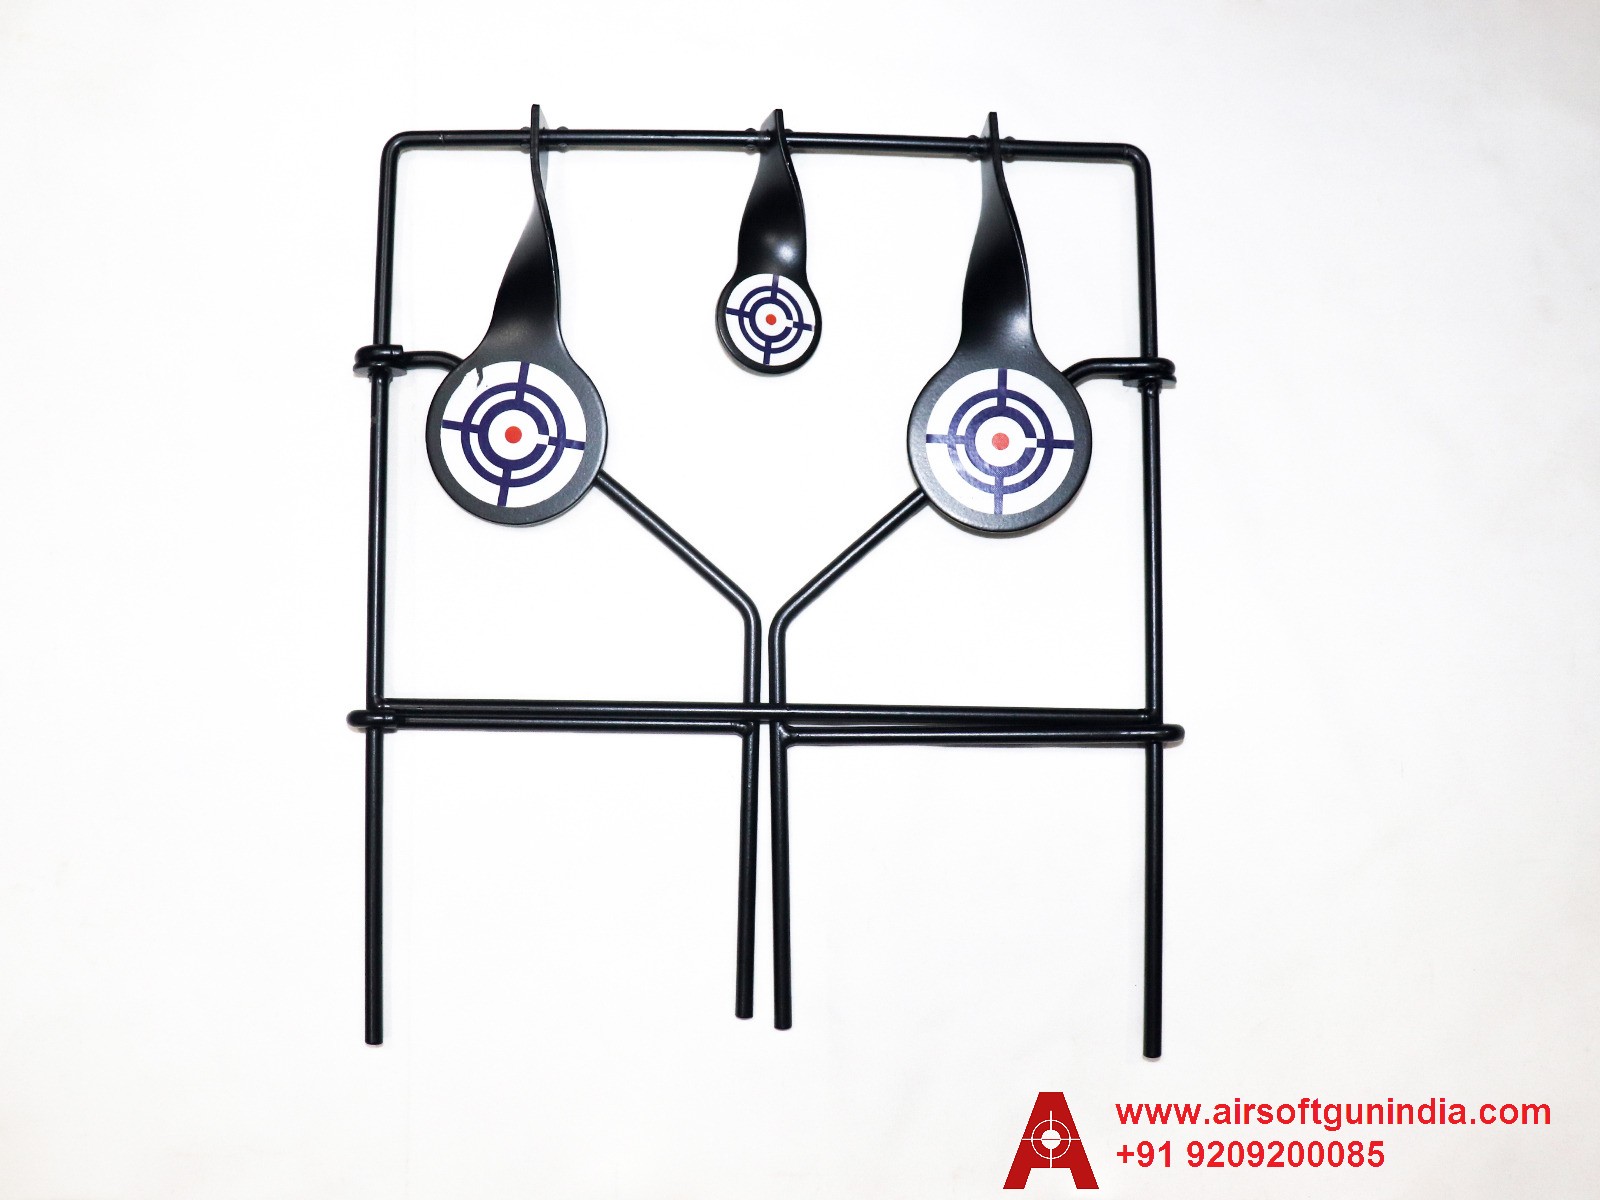 METAL TARGET WITH 3 PADDLES By Airsoft Gun India